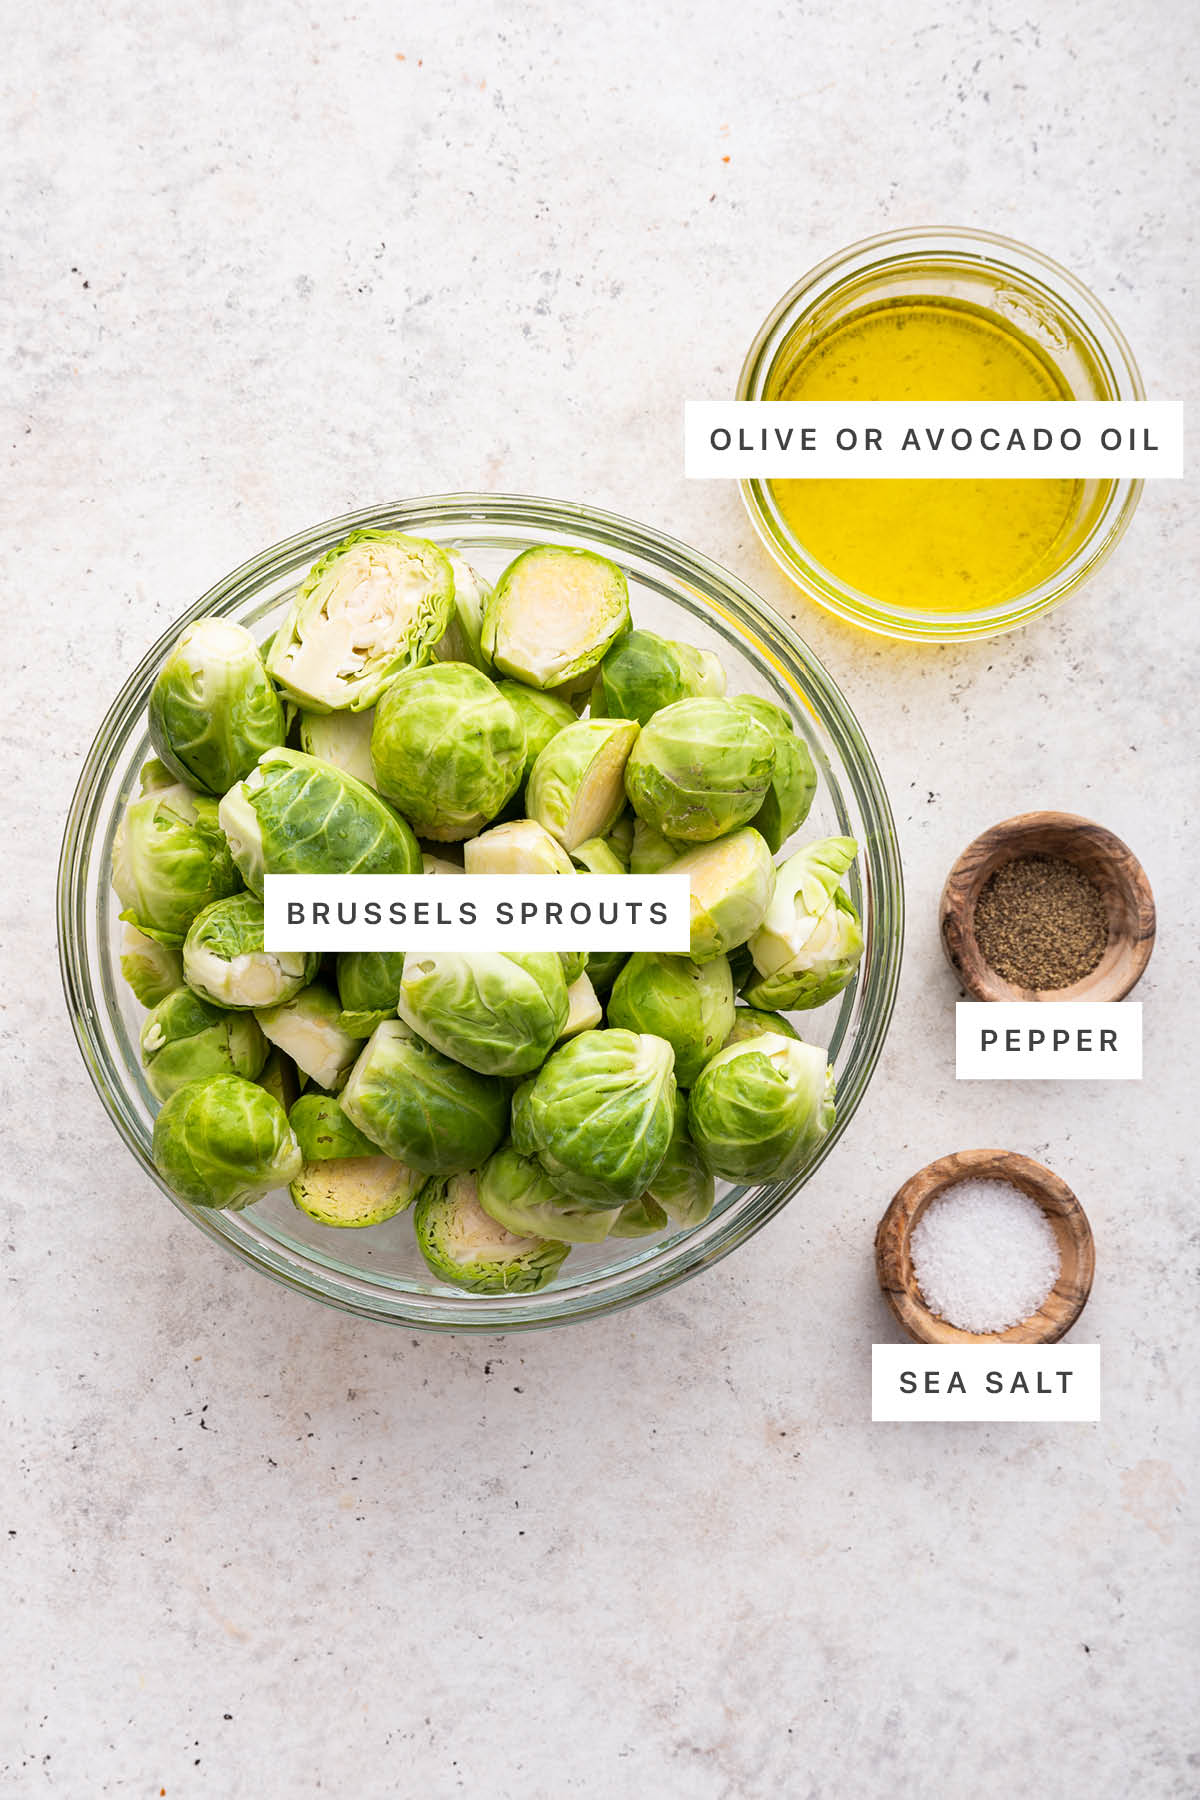 Ingredients measured out to make Roasted Brussels Sprouts: brussels sprouts, olive or avocado oil, pepper and sea salt.